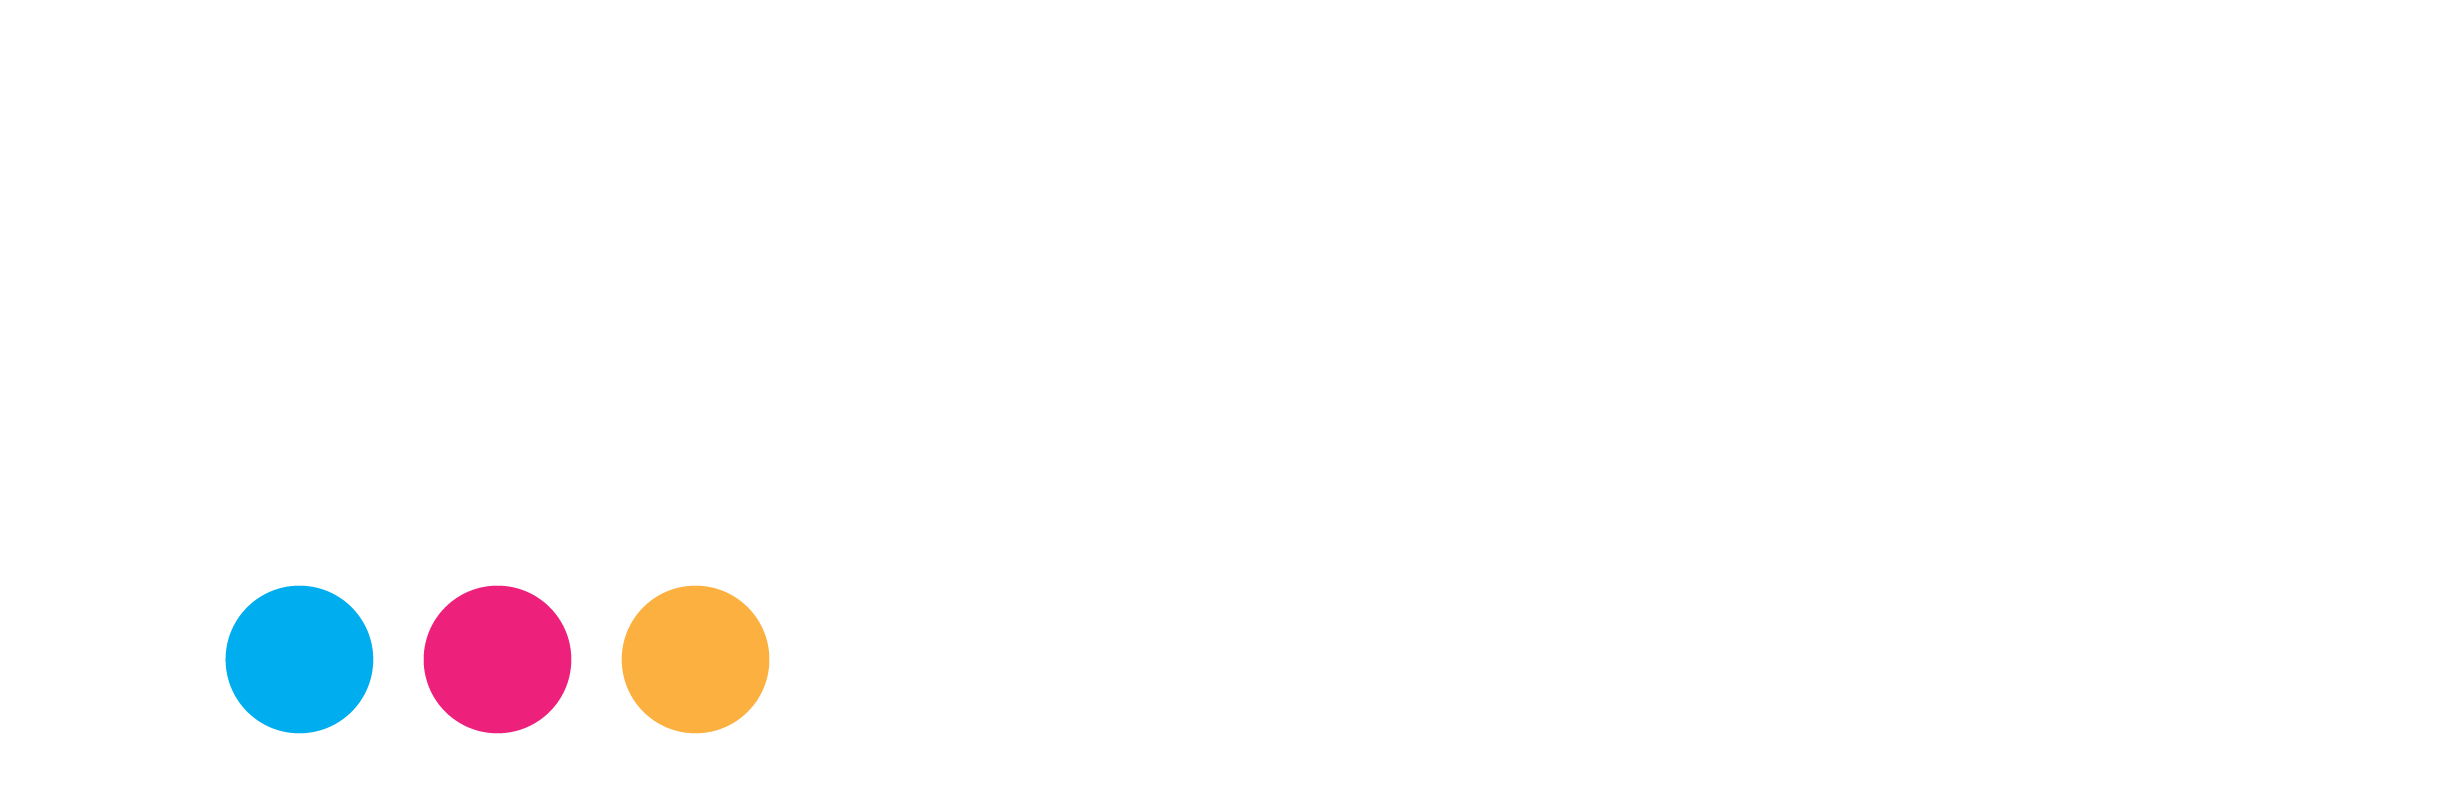 cropped-Mehery-Logo-in-white-06-2.png